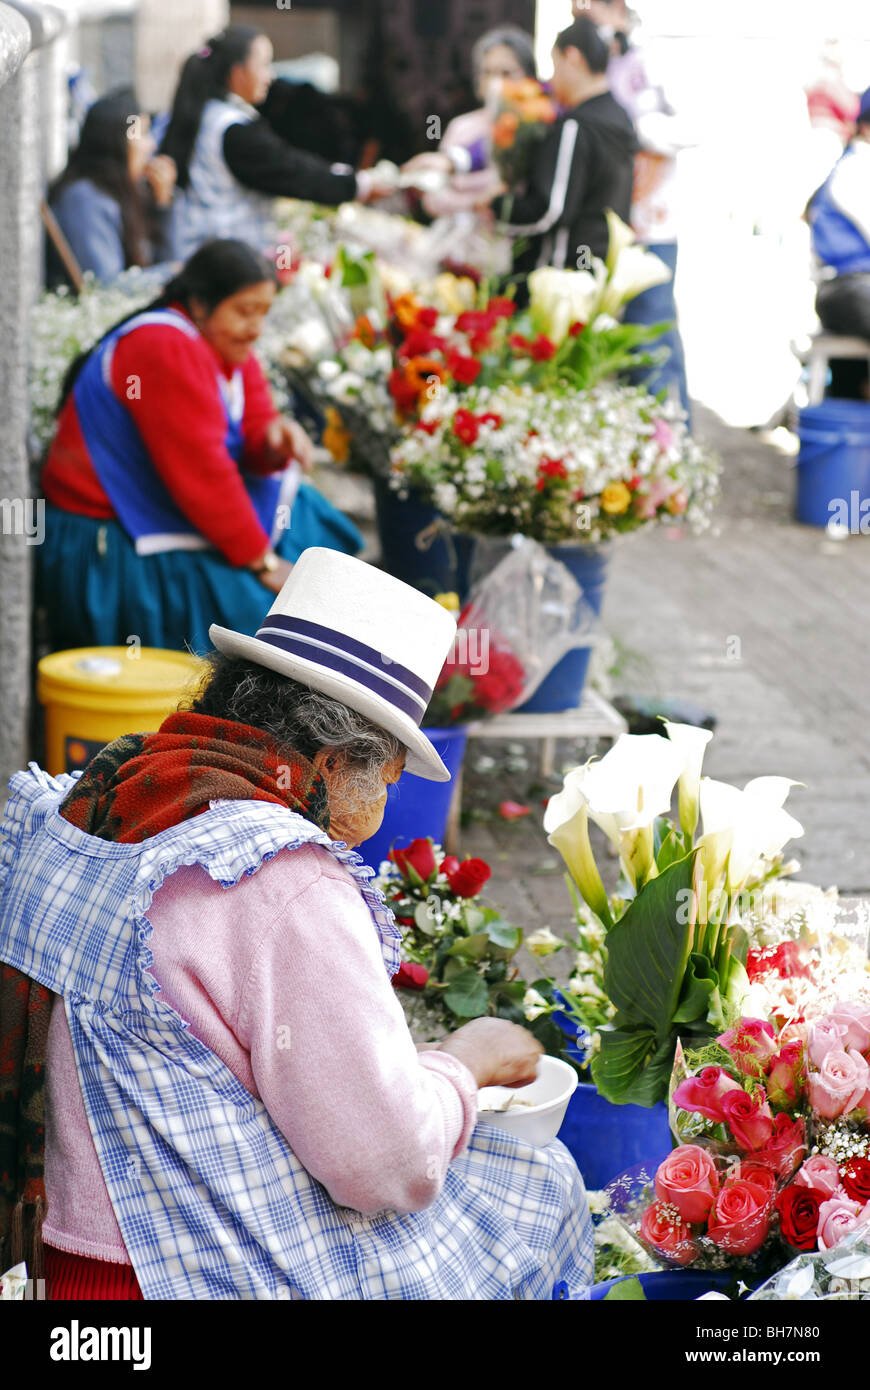 Ecuador, Cuenca, view of old women selling bunches of flowers in flower market, leaning back on a wall Stock Photo